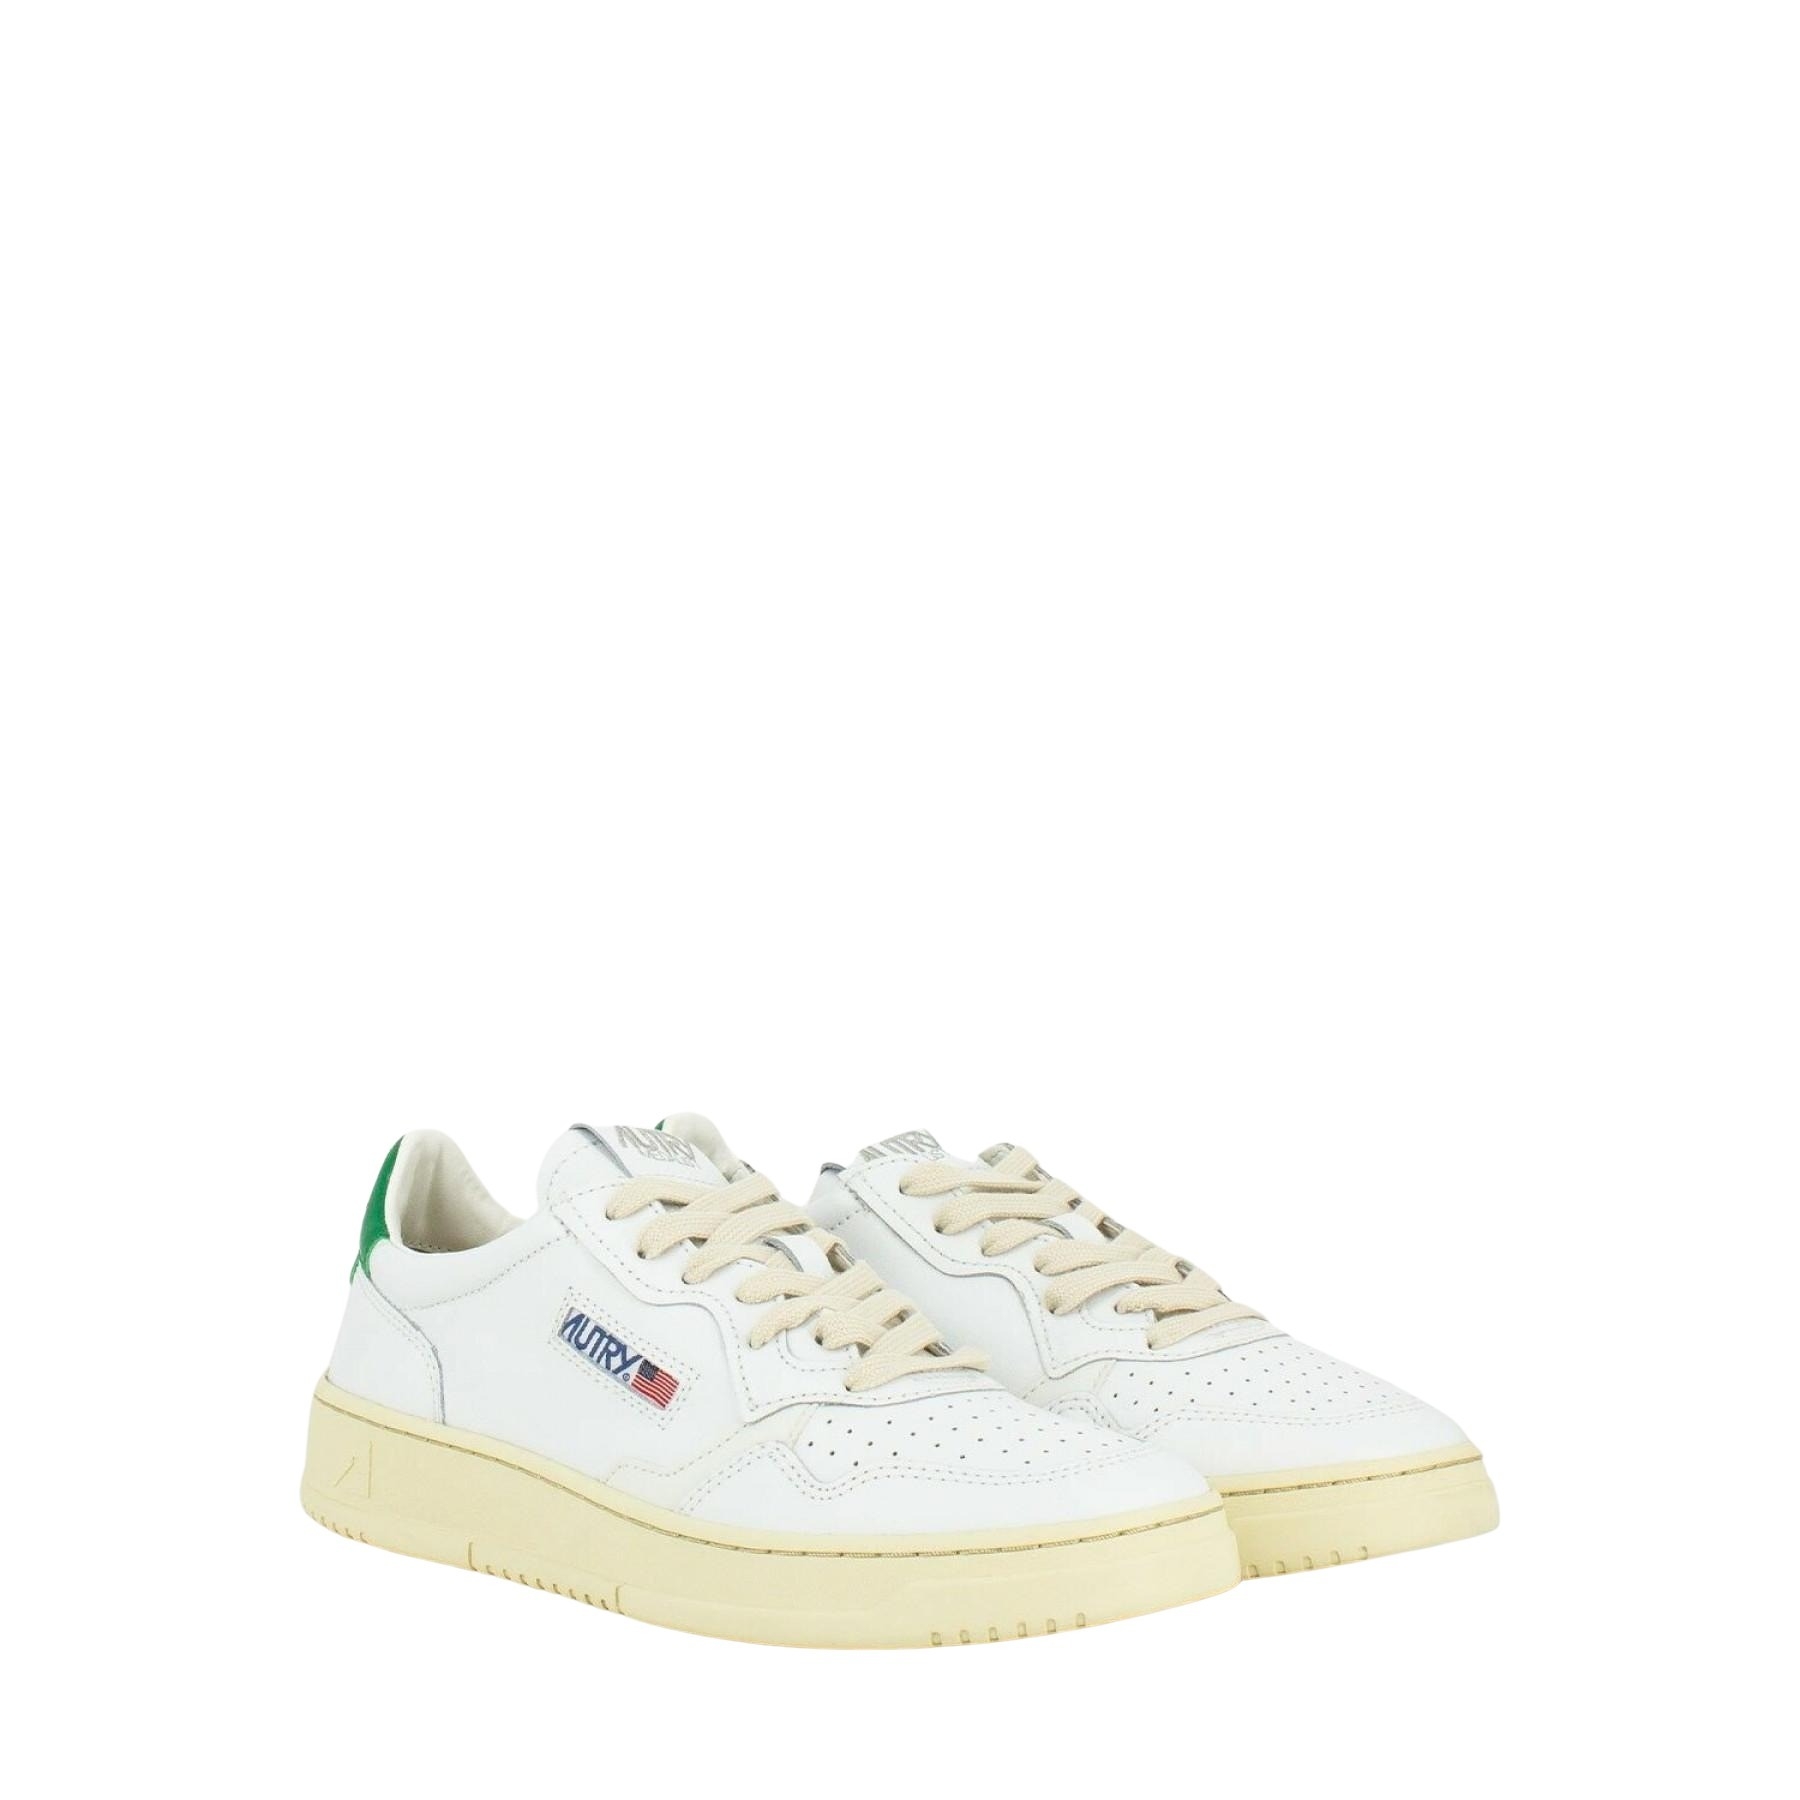 autry scarpe medalist ll20 leather bianco/green donna